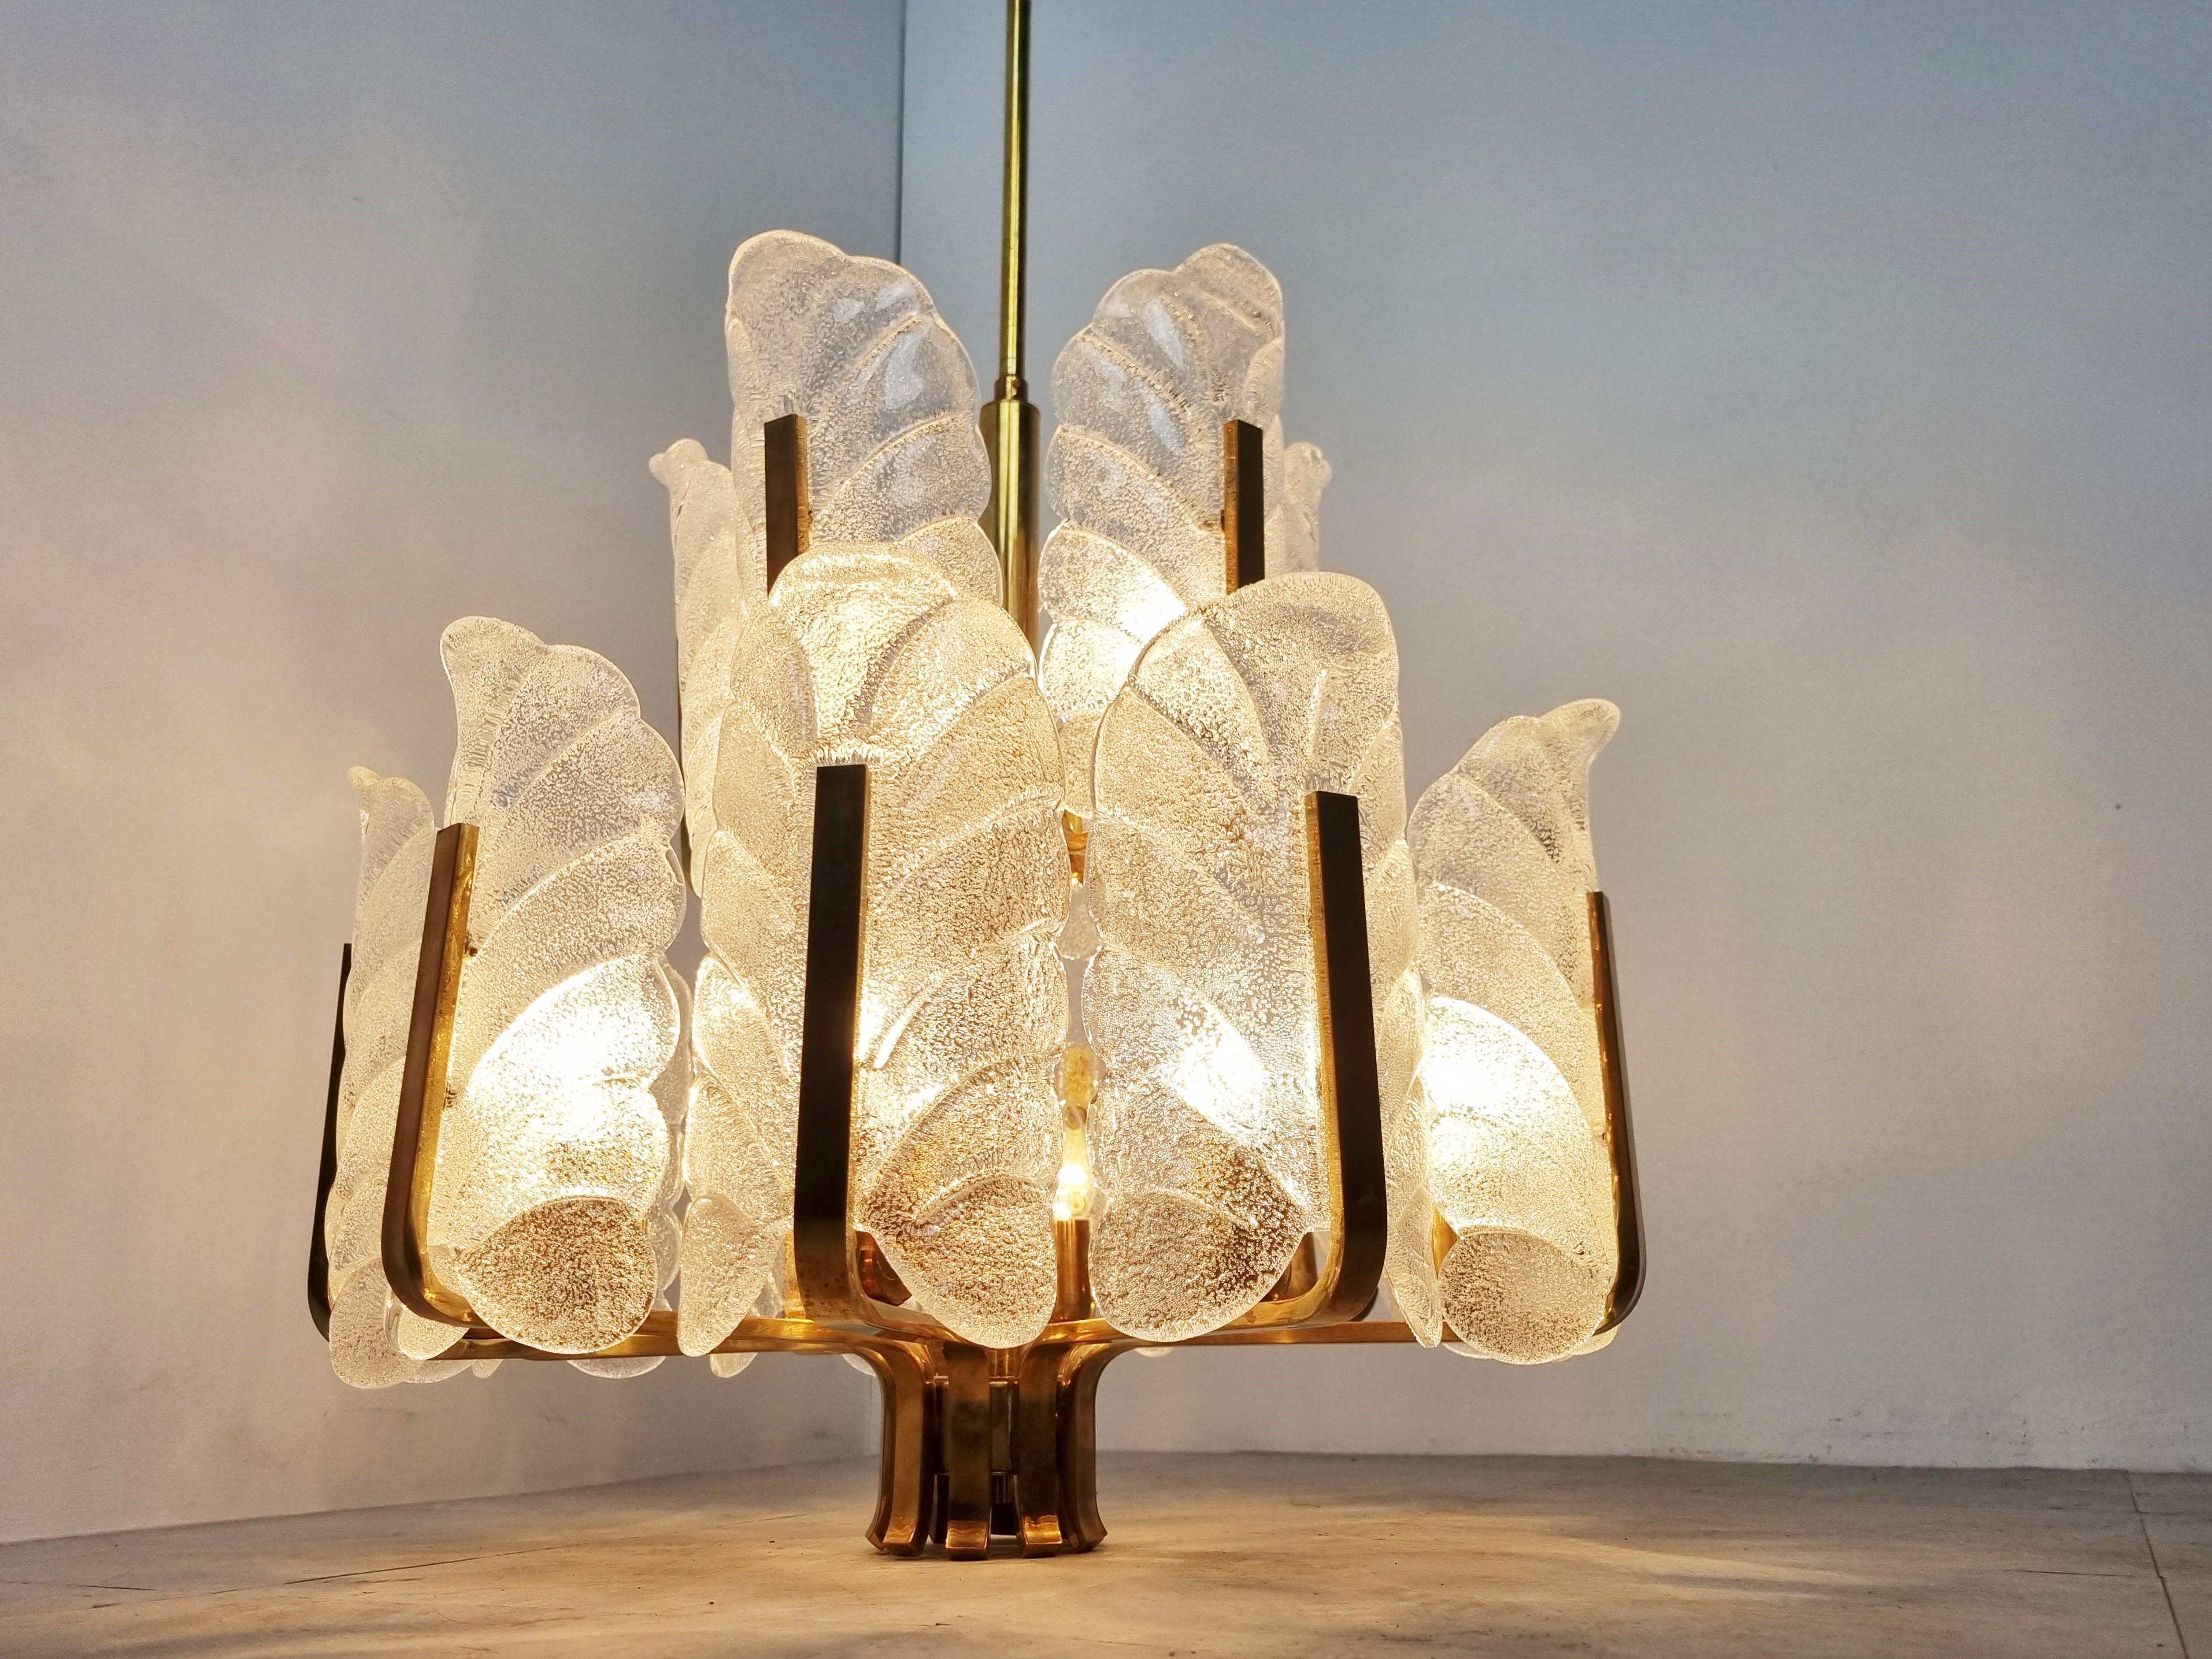 Impressive 15 armed brass chandelier designed by Carl Fagerlund for Orrefors.

It feautures 15 murano glass leaf shaped glass shades.

It emits a spectacular light.

Tested and ready to use with regular E14 light bulbs.

1960s -